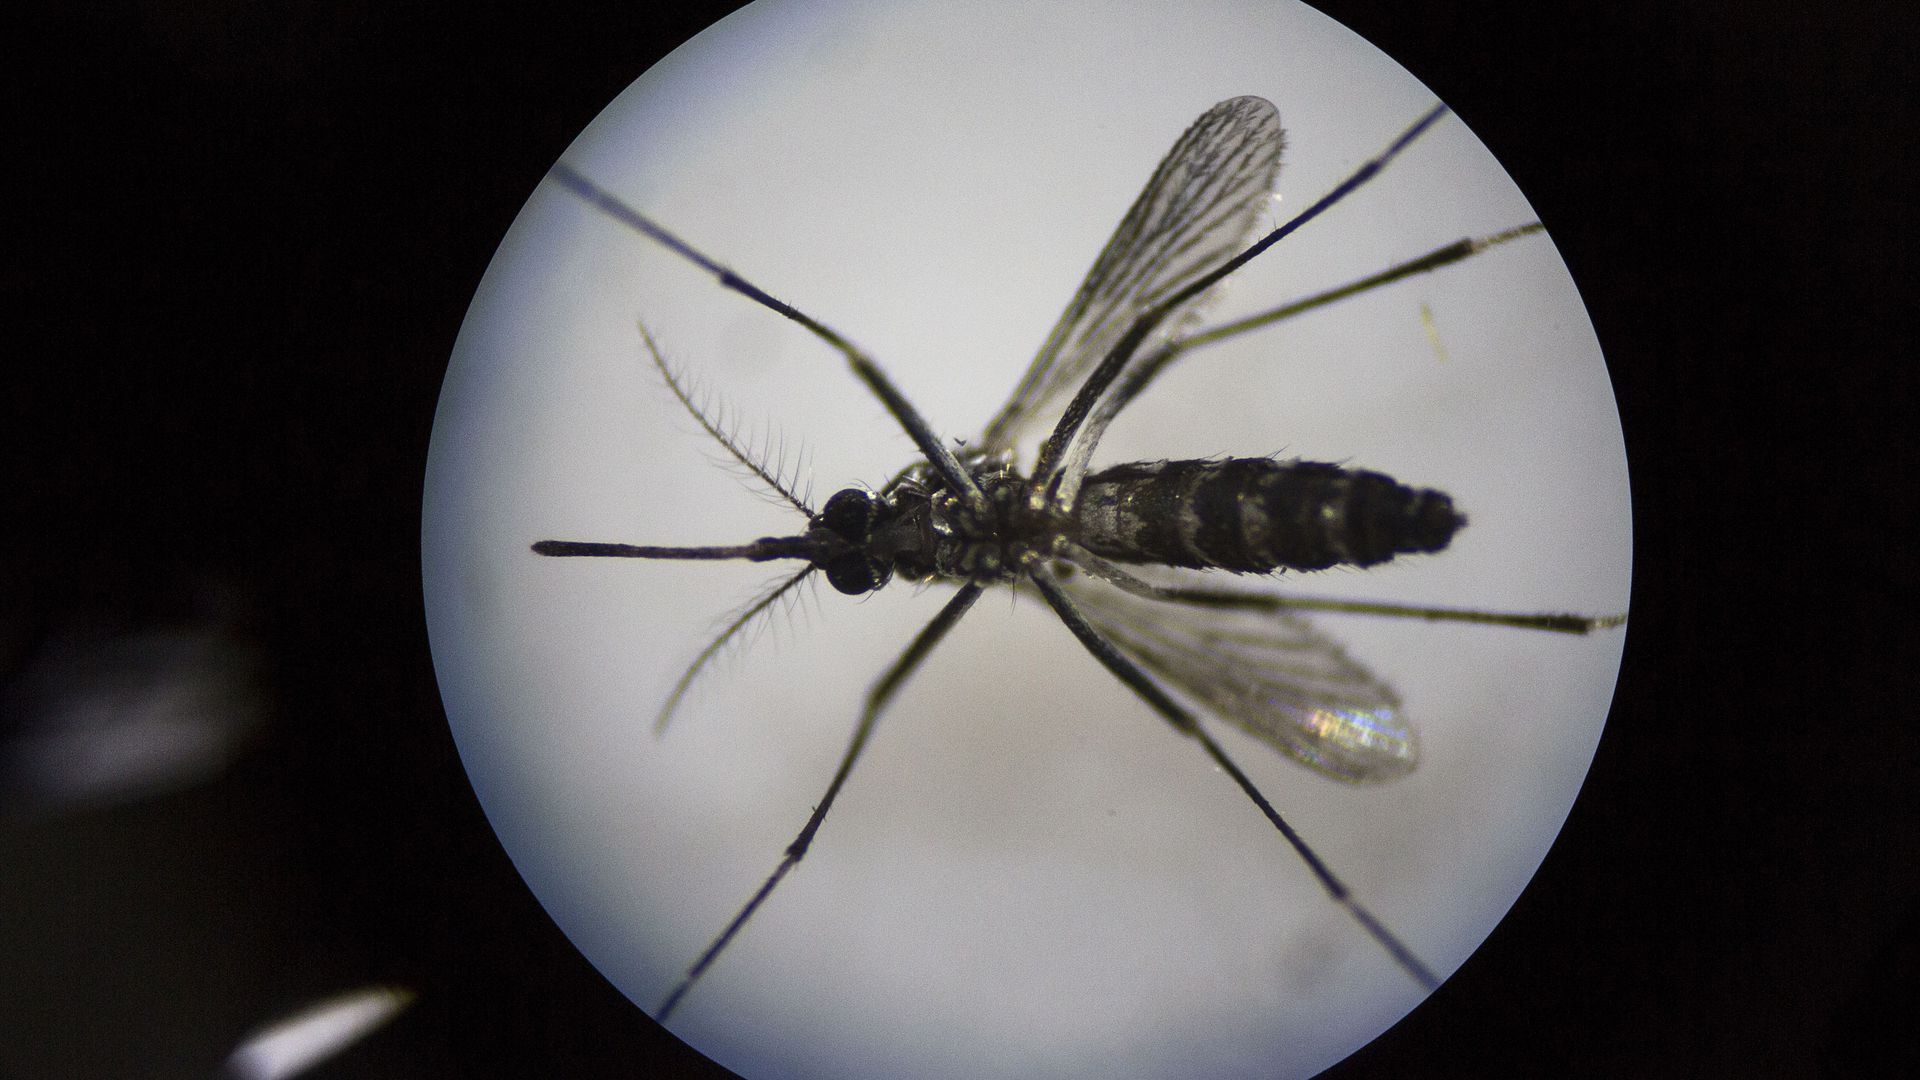 The Aedes albopictus, which can spread Zika, seen way too close.